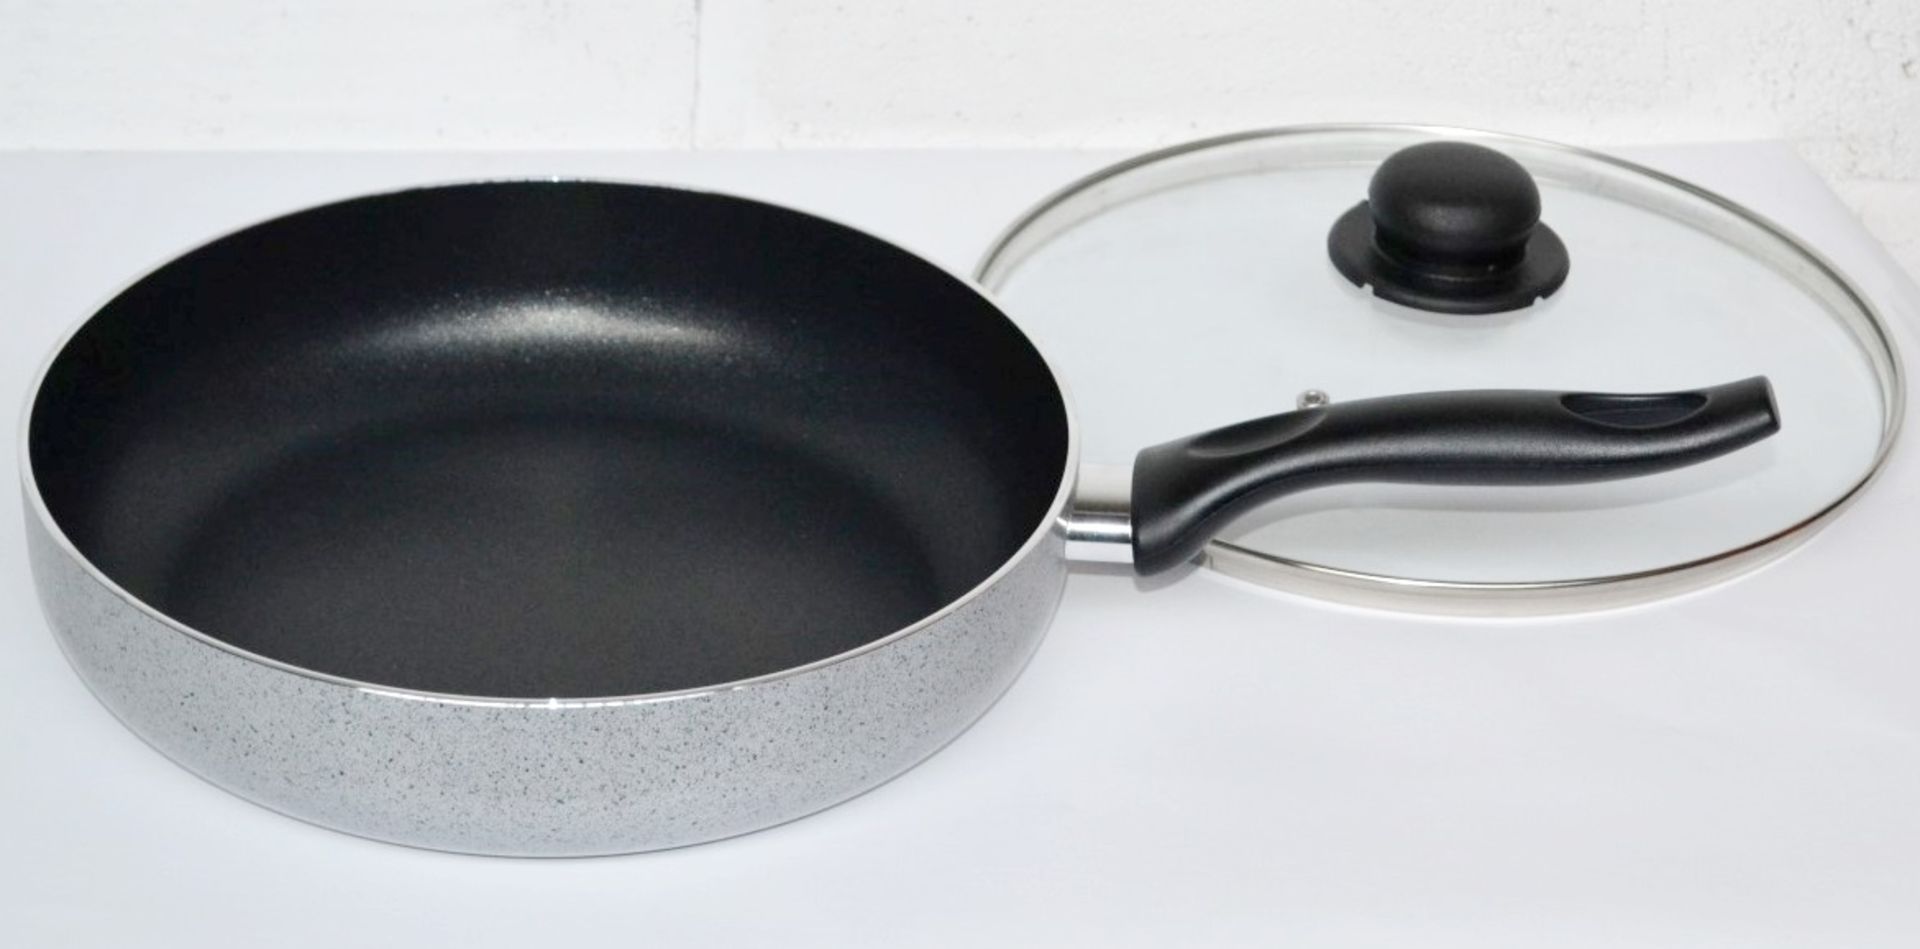 1 x 28cm Non-stick Frying Pans with Glass Lids - Colour: Black - Made In Italy - New & Sealed Stock, - Image 4 of 5